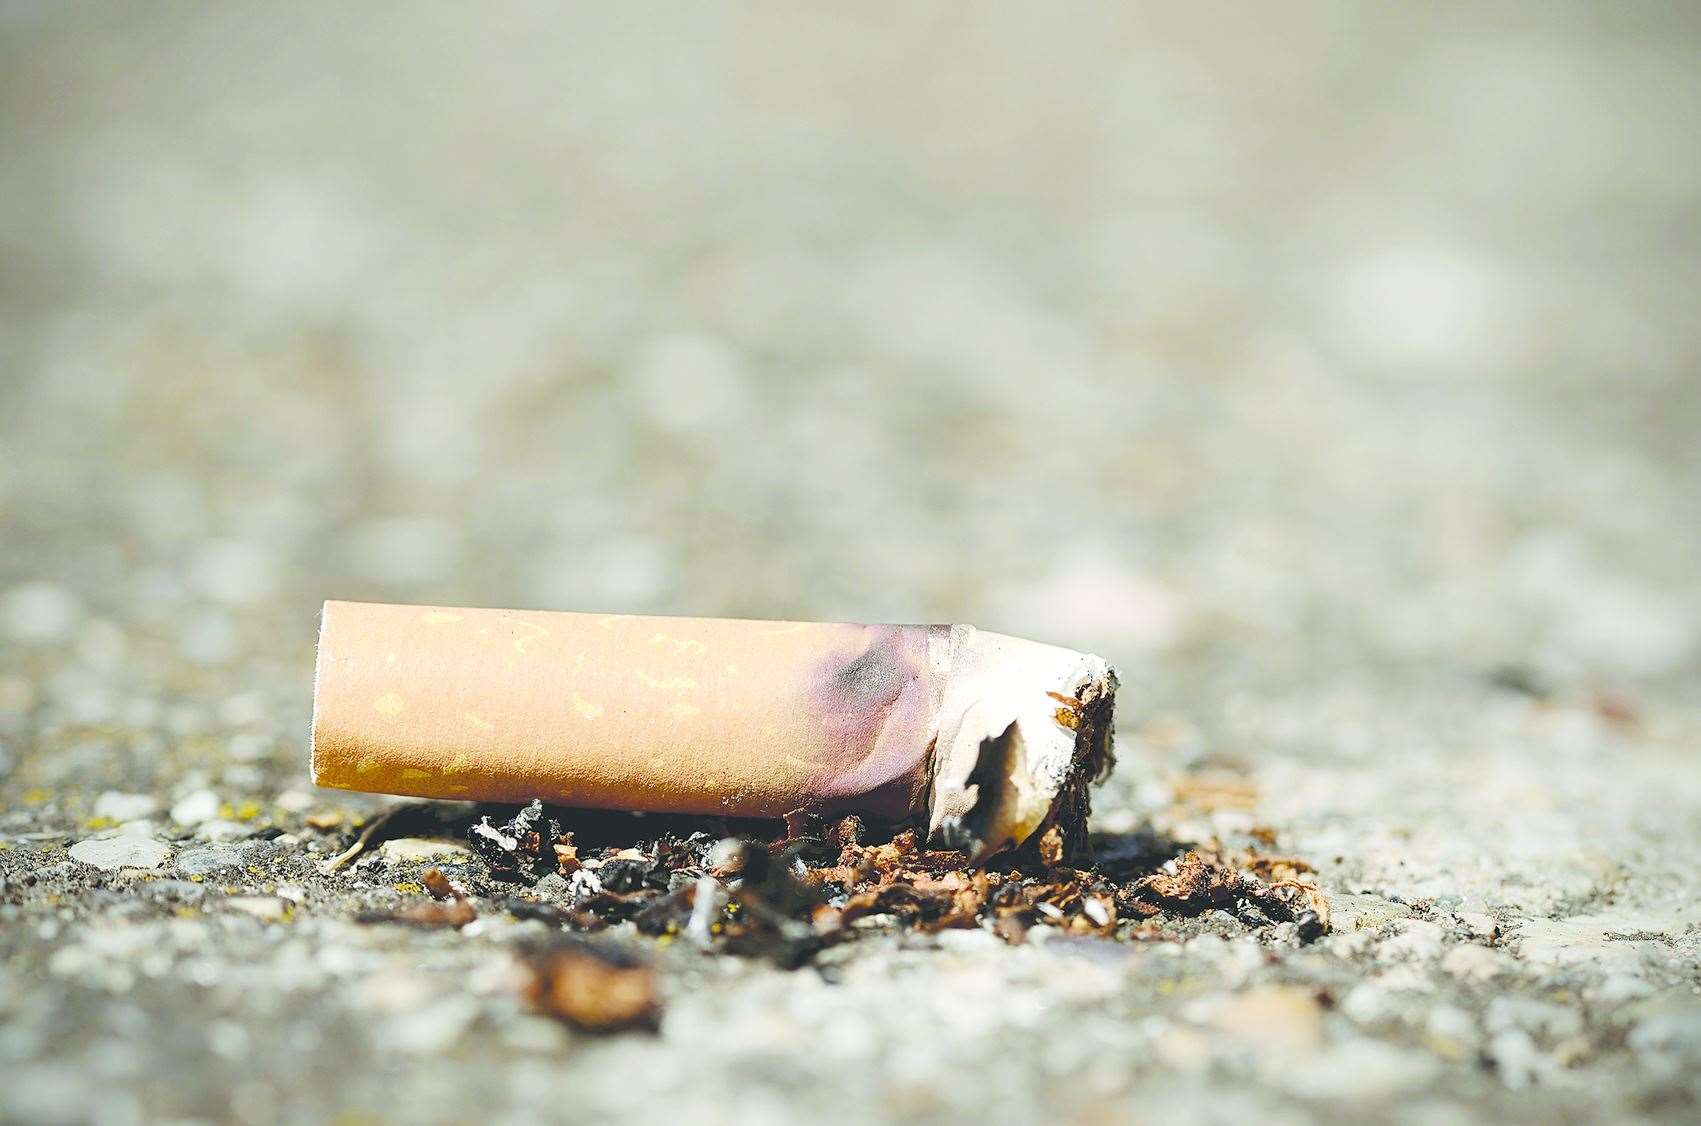 The suspected stolen cigarettes were found after a police chase in Sittingbourne. Picture: Stock